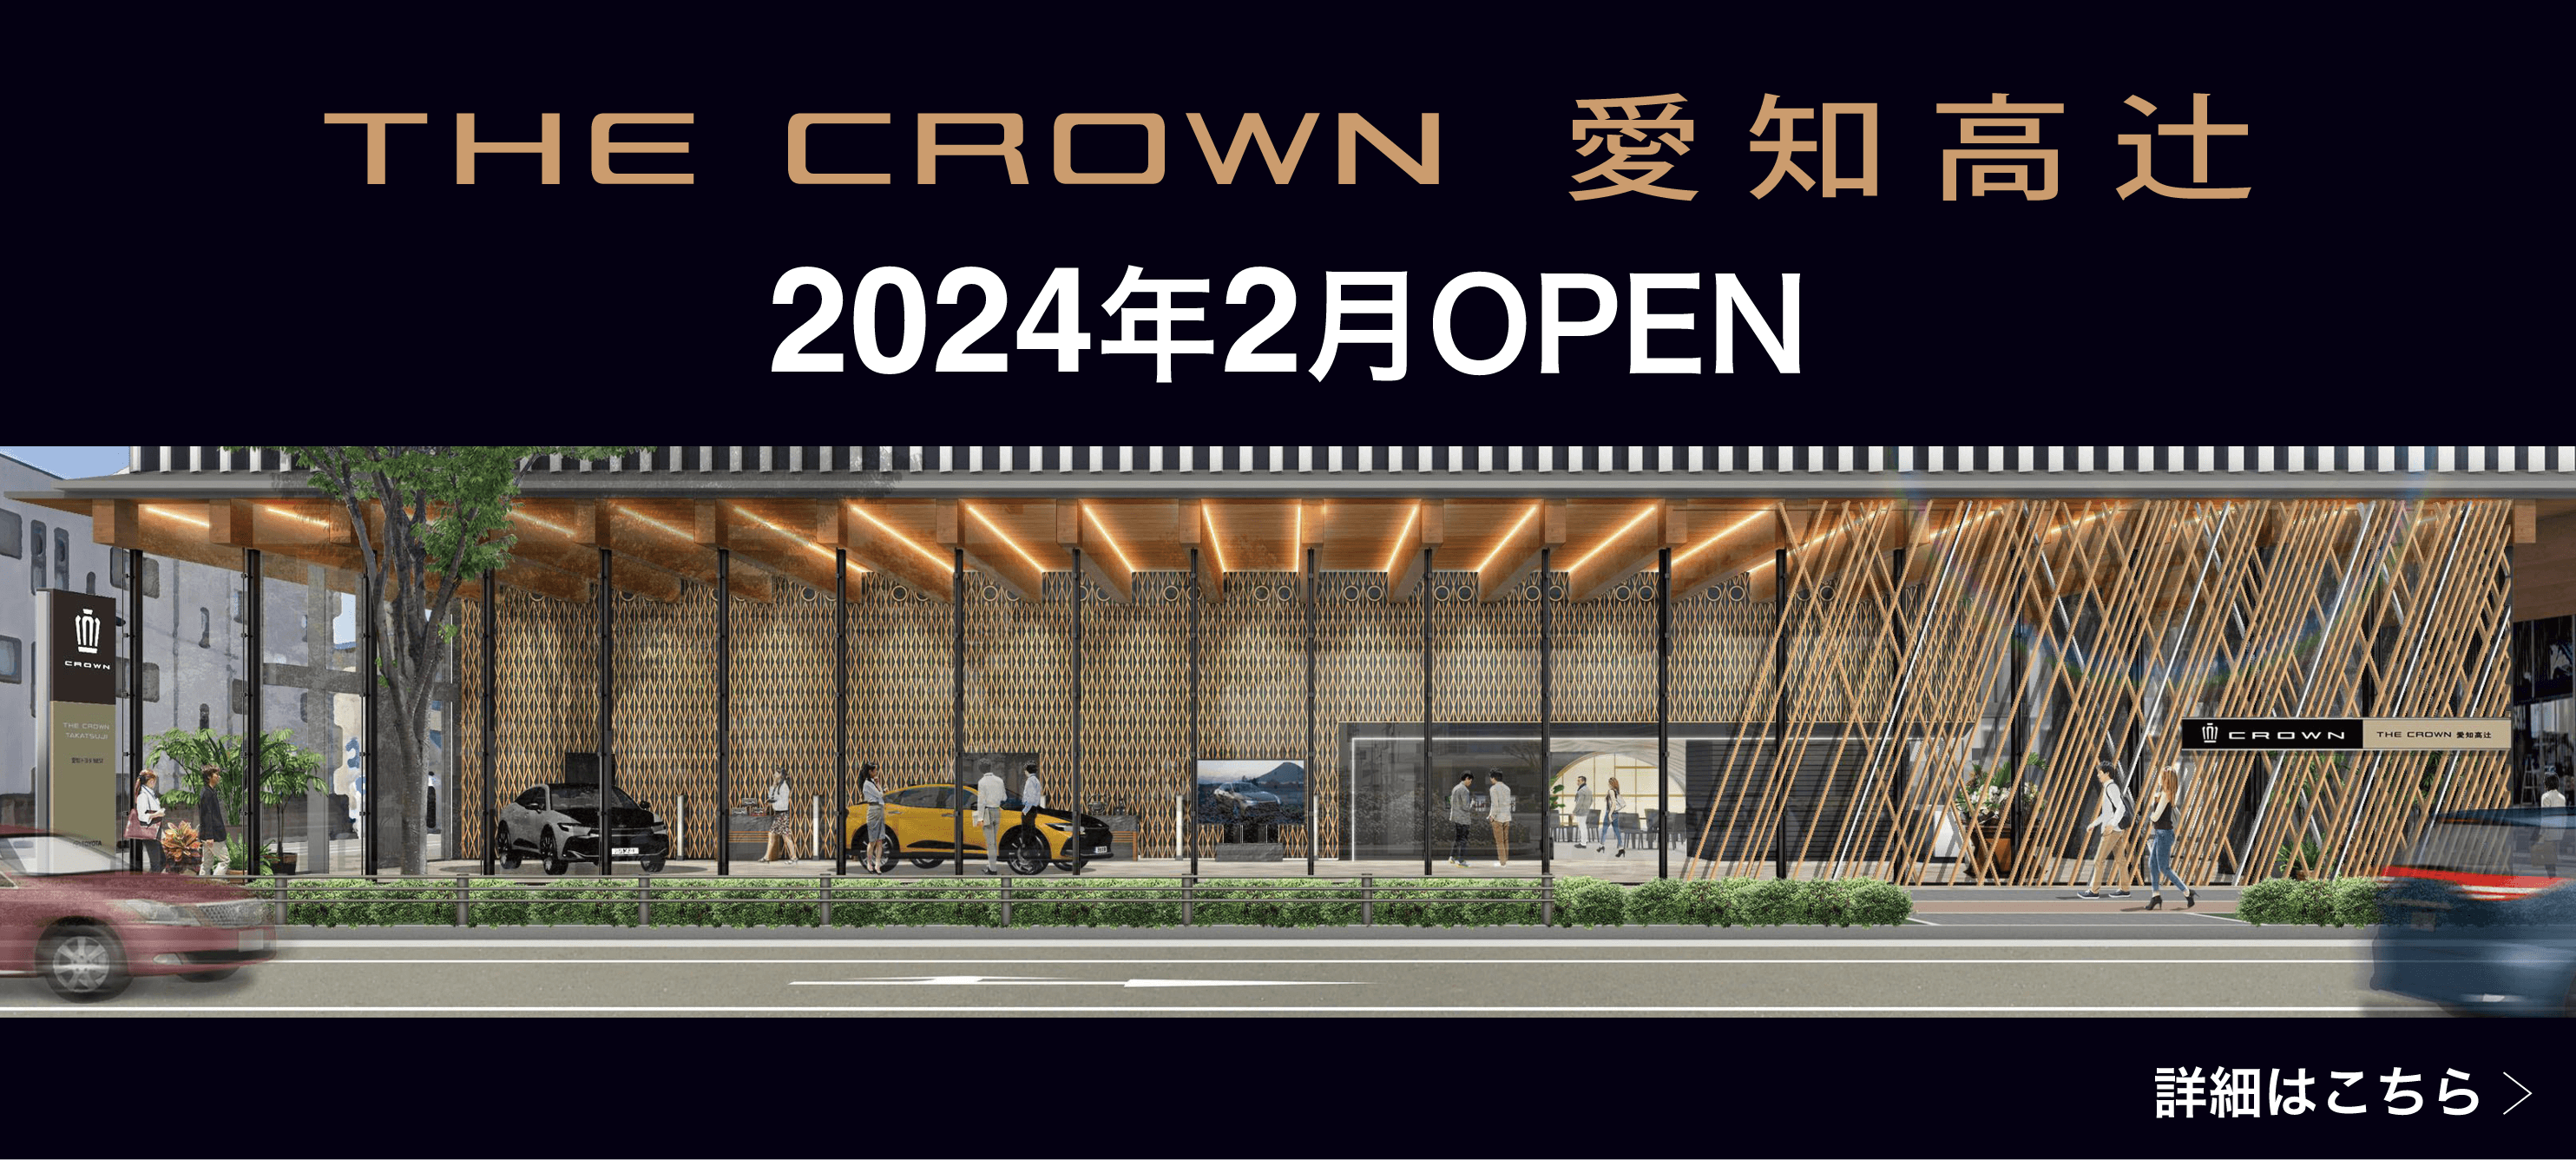 THE CROWN 愛知高辻